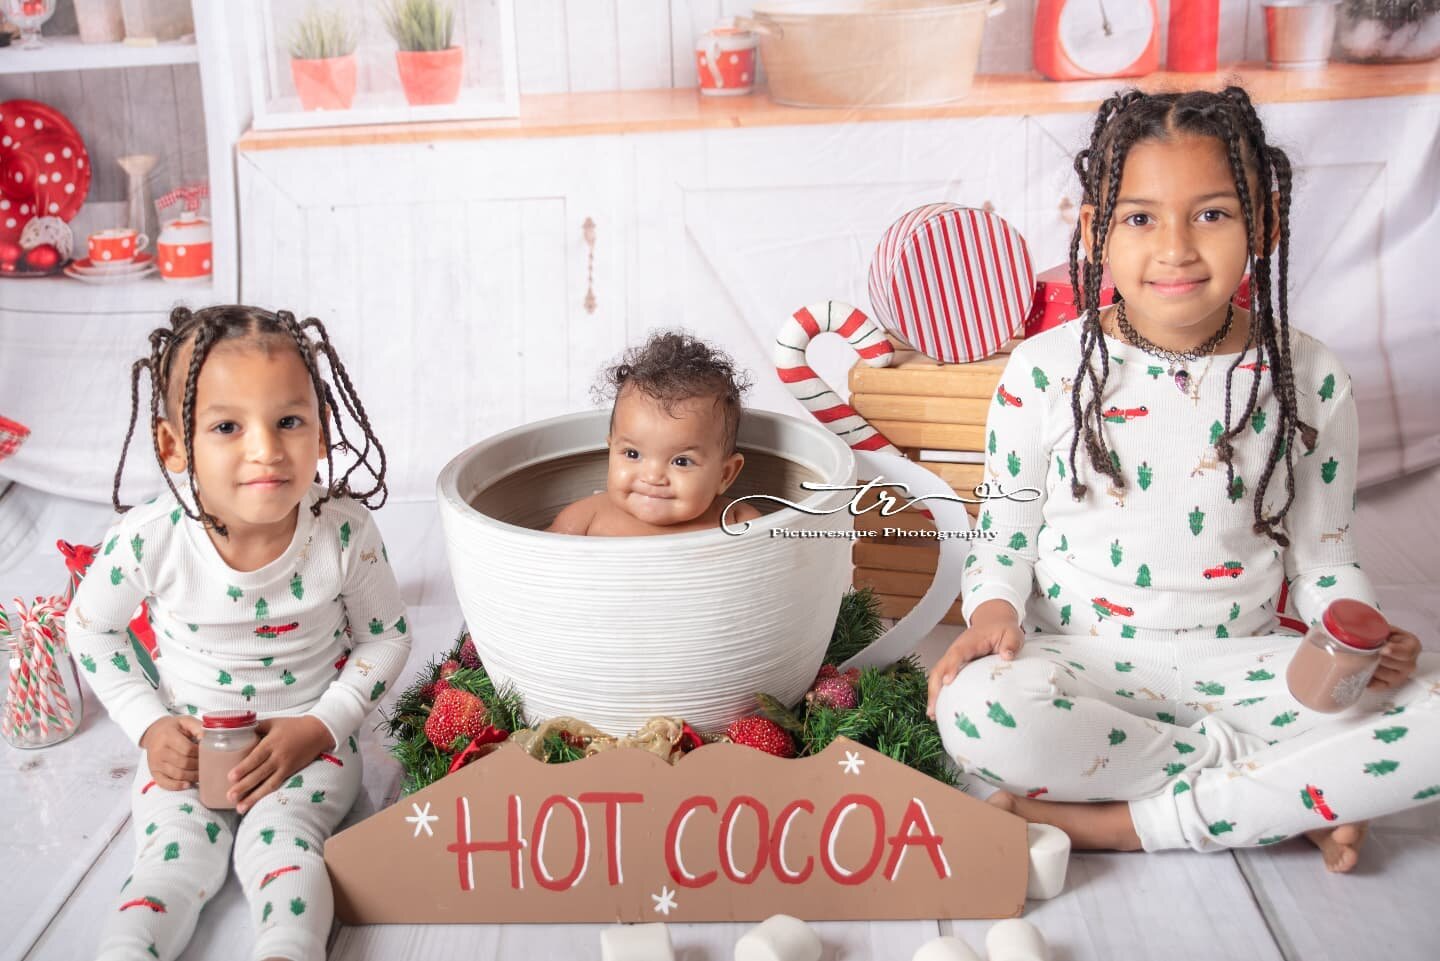 Happiness is... Hot Chocolate 🍫☕
.
#trpicturesque #hotchocolate #hotcocoa #christmasphotos #sittersession #6months #adorable #santababy #marshmallow #candycane #baby #babyinacup #chunkybaby #winter #happiness #siblings #siblinglove #sibling